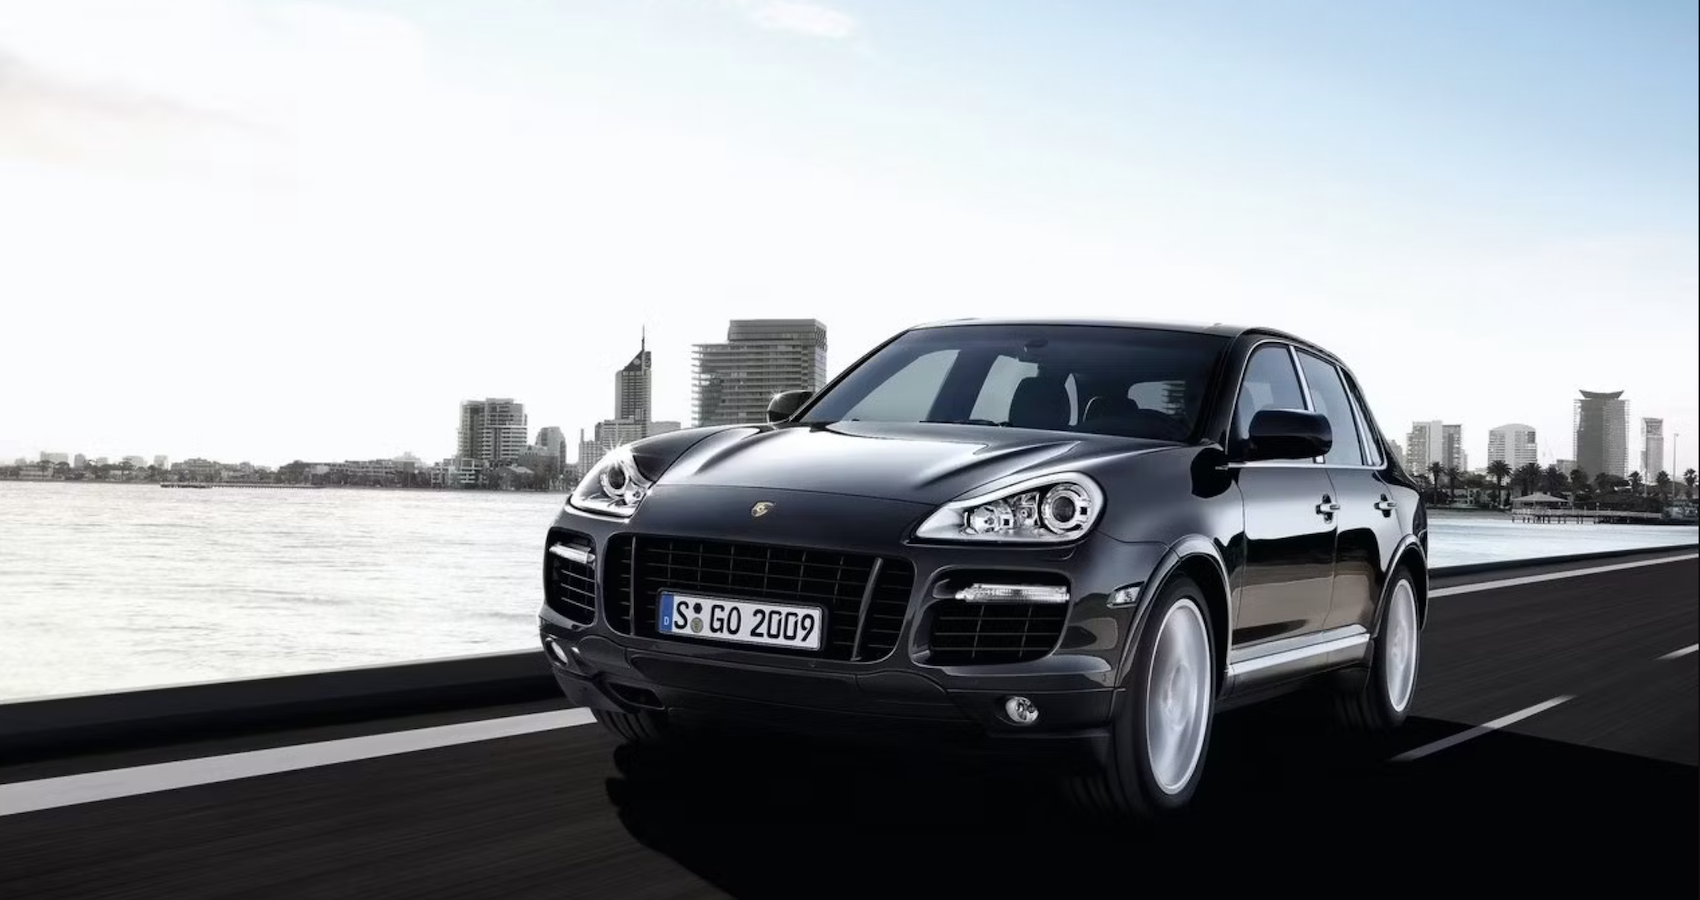 Used Car: Why You Should Buy A 2009 Porsche Cayenne